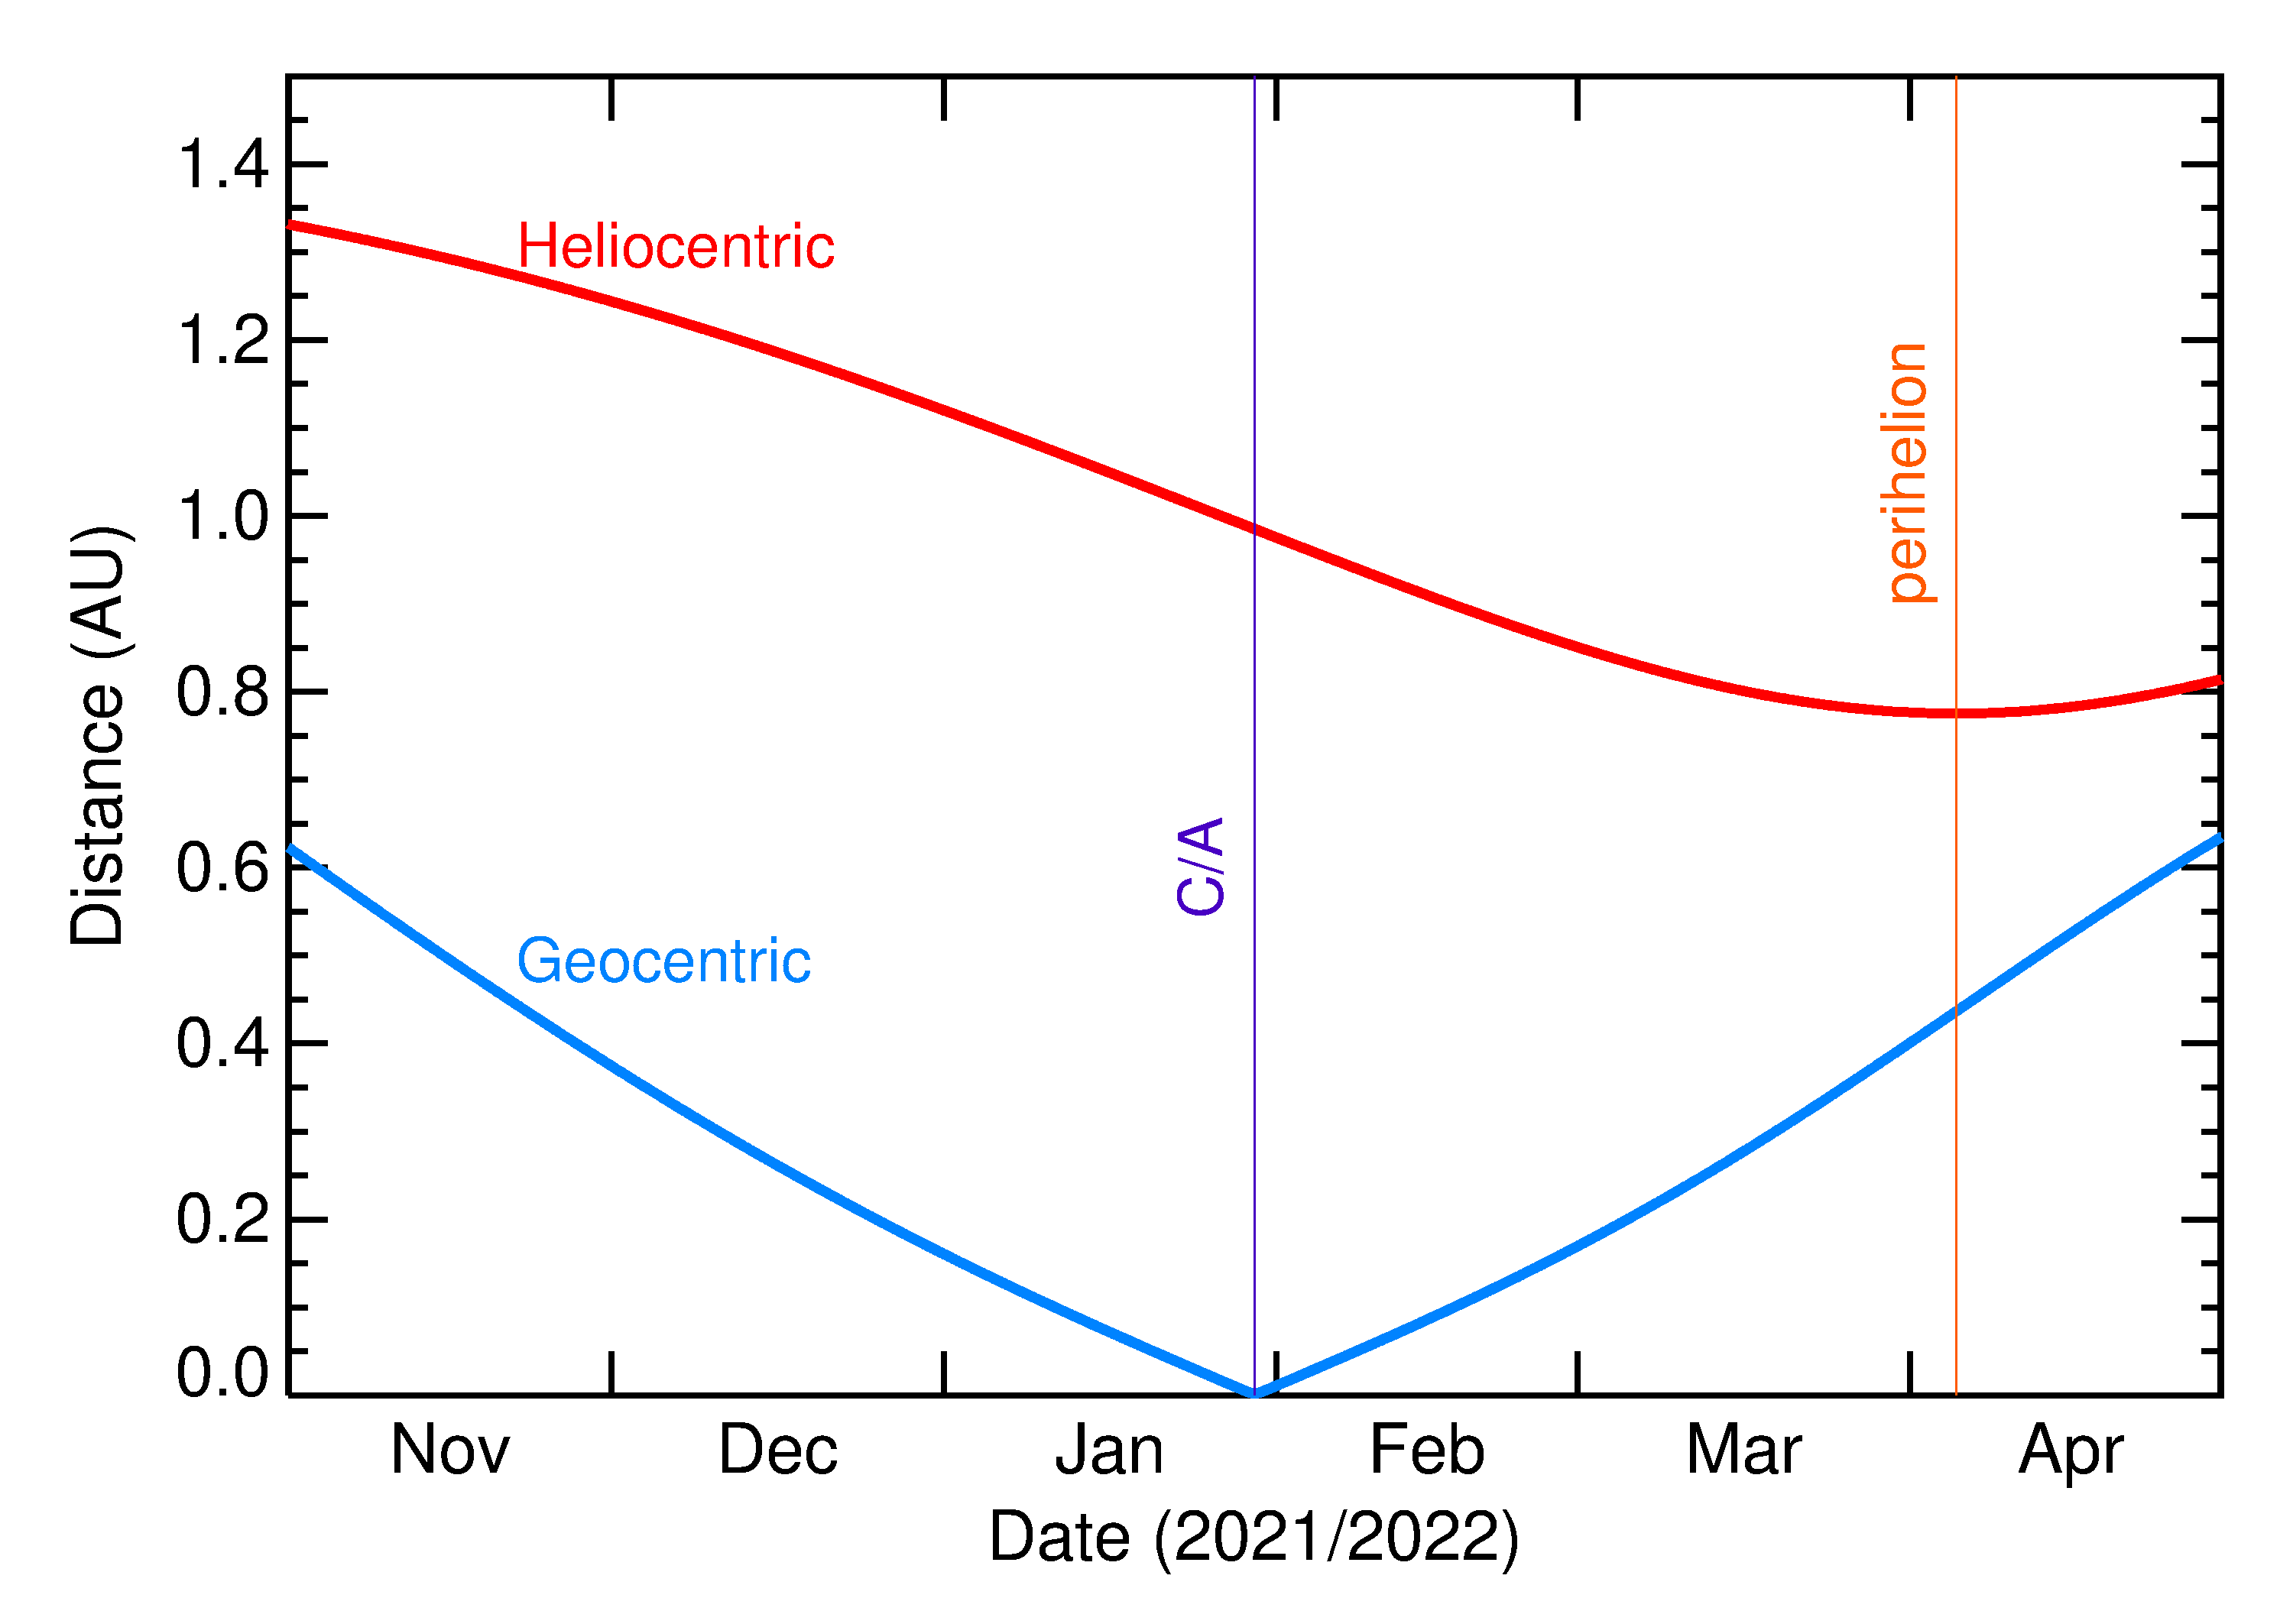 Heliocentric and Geocentric Distances of 2022 BN2 in the months around closest approach